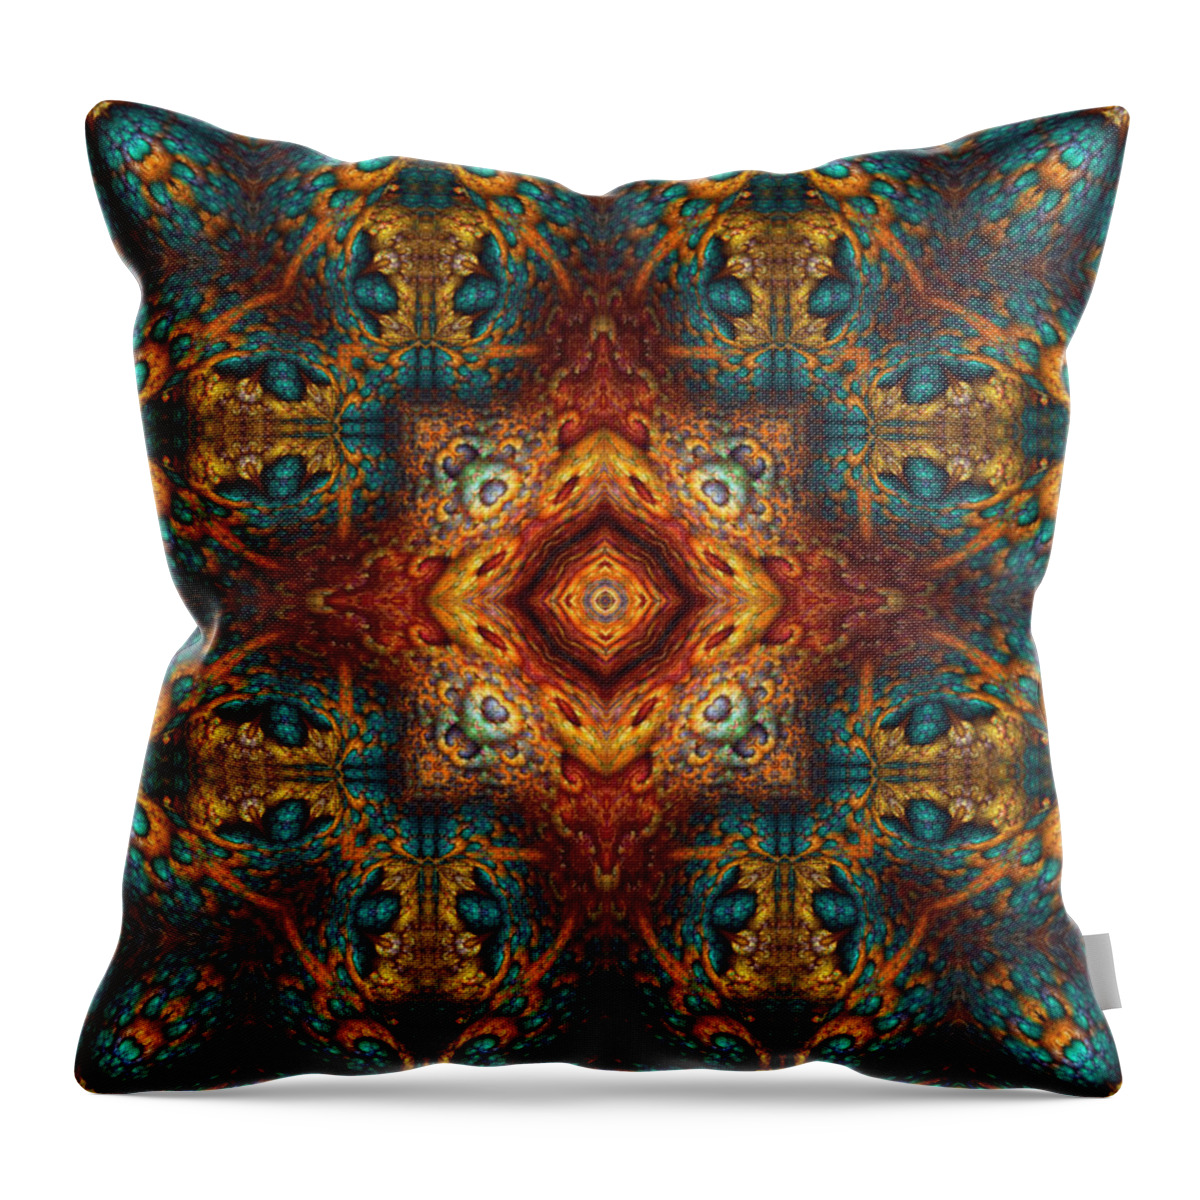 Kaleidoscope Throw Pillow featuring the digital art Moroccan Fantasy No 2 by Charmaine Zoe